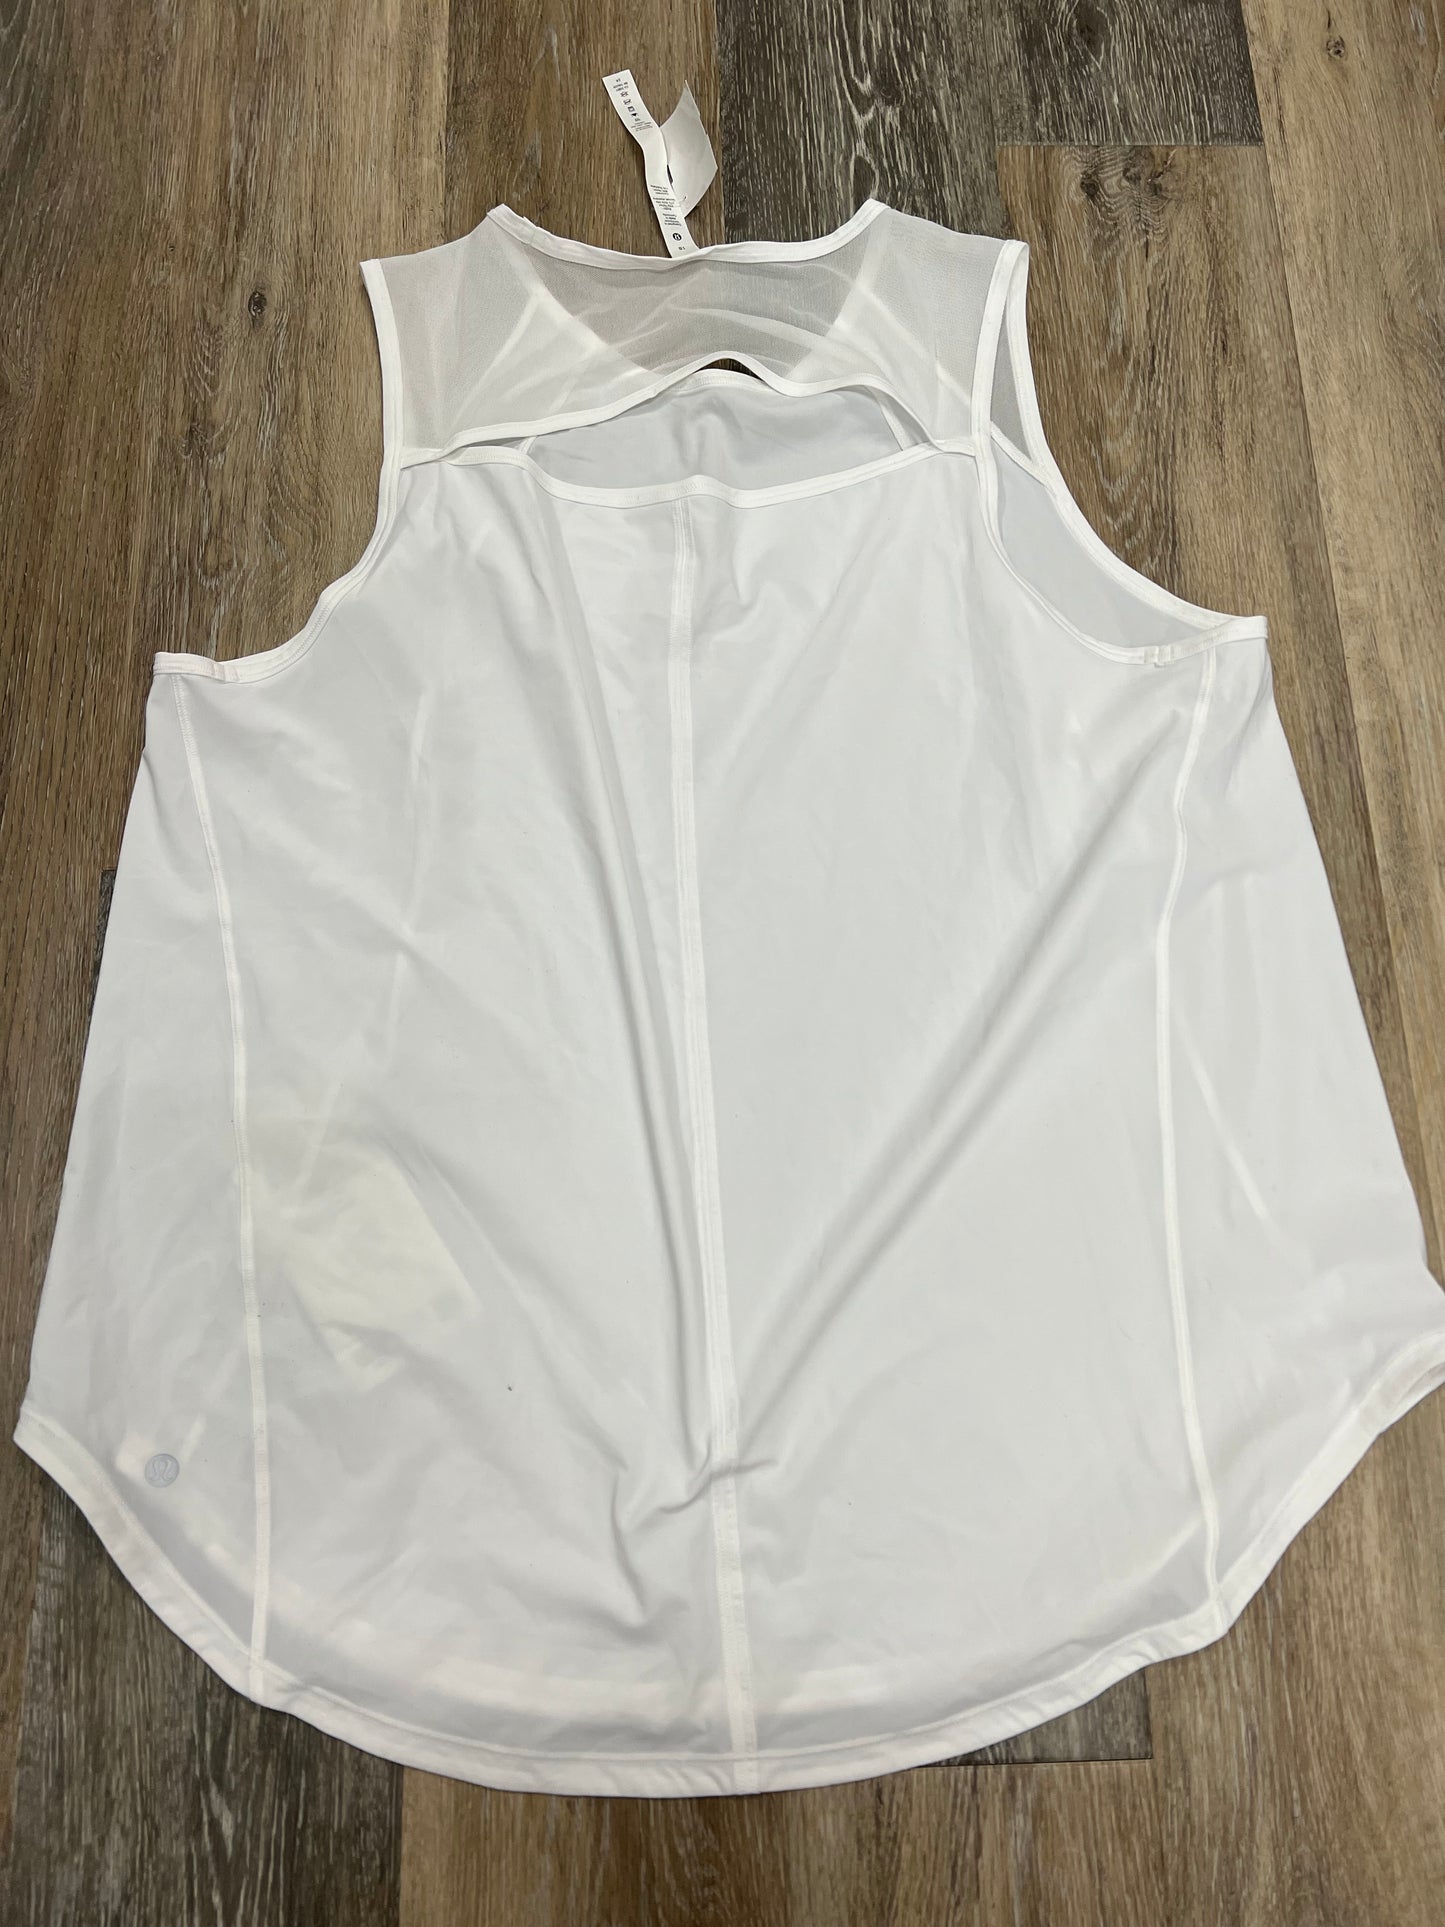 Athletic Tank Top By Lululemon  Size: 18